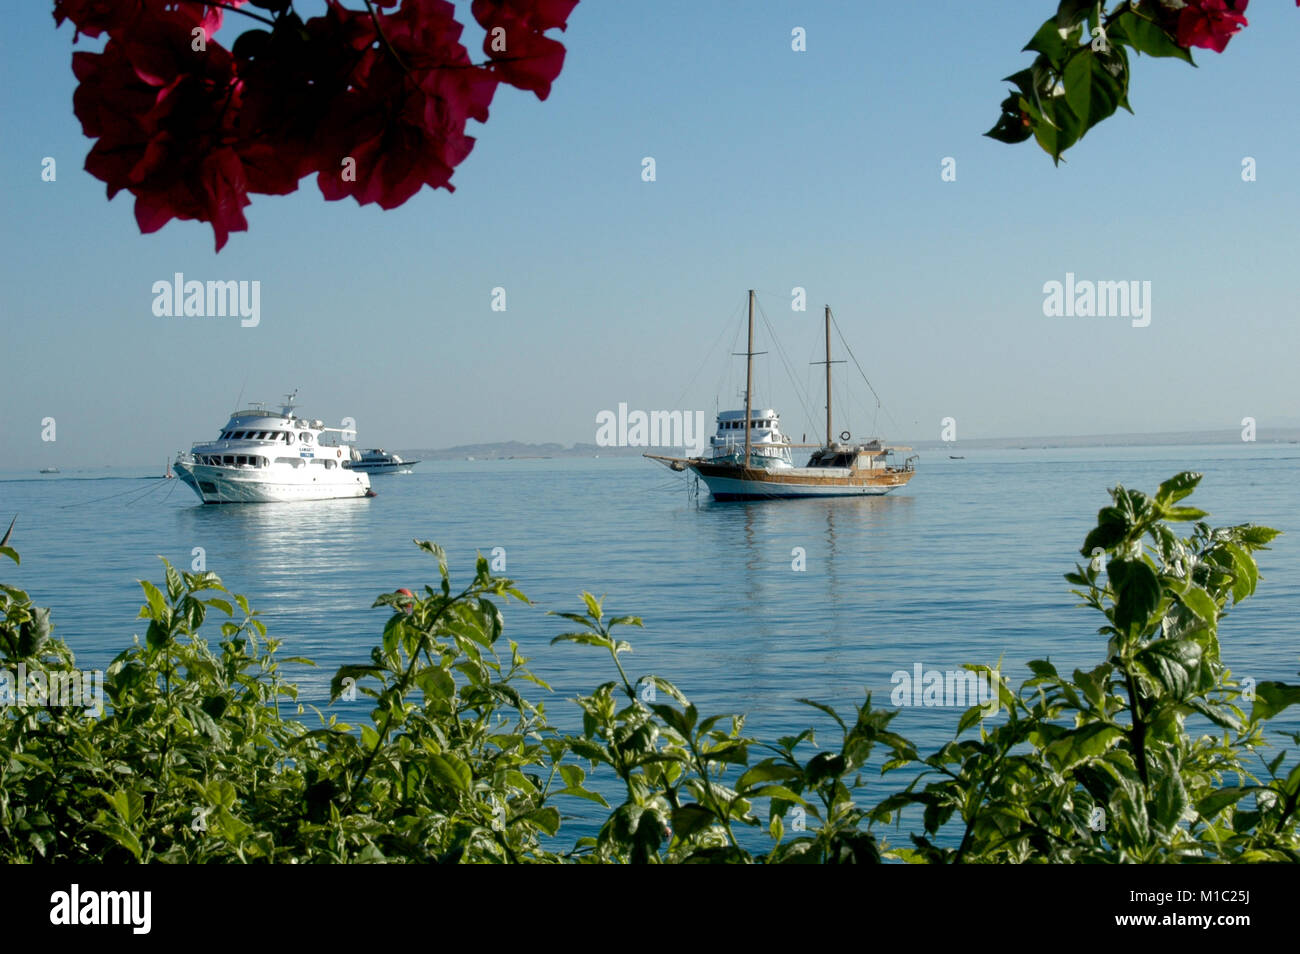 Beautiful flowers and yachts on the background of the Red Sea, Egypt Stock Photo